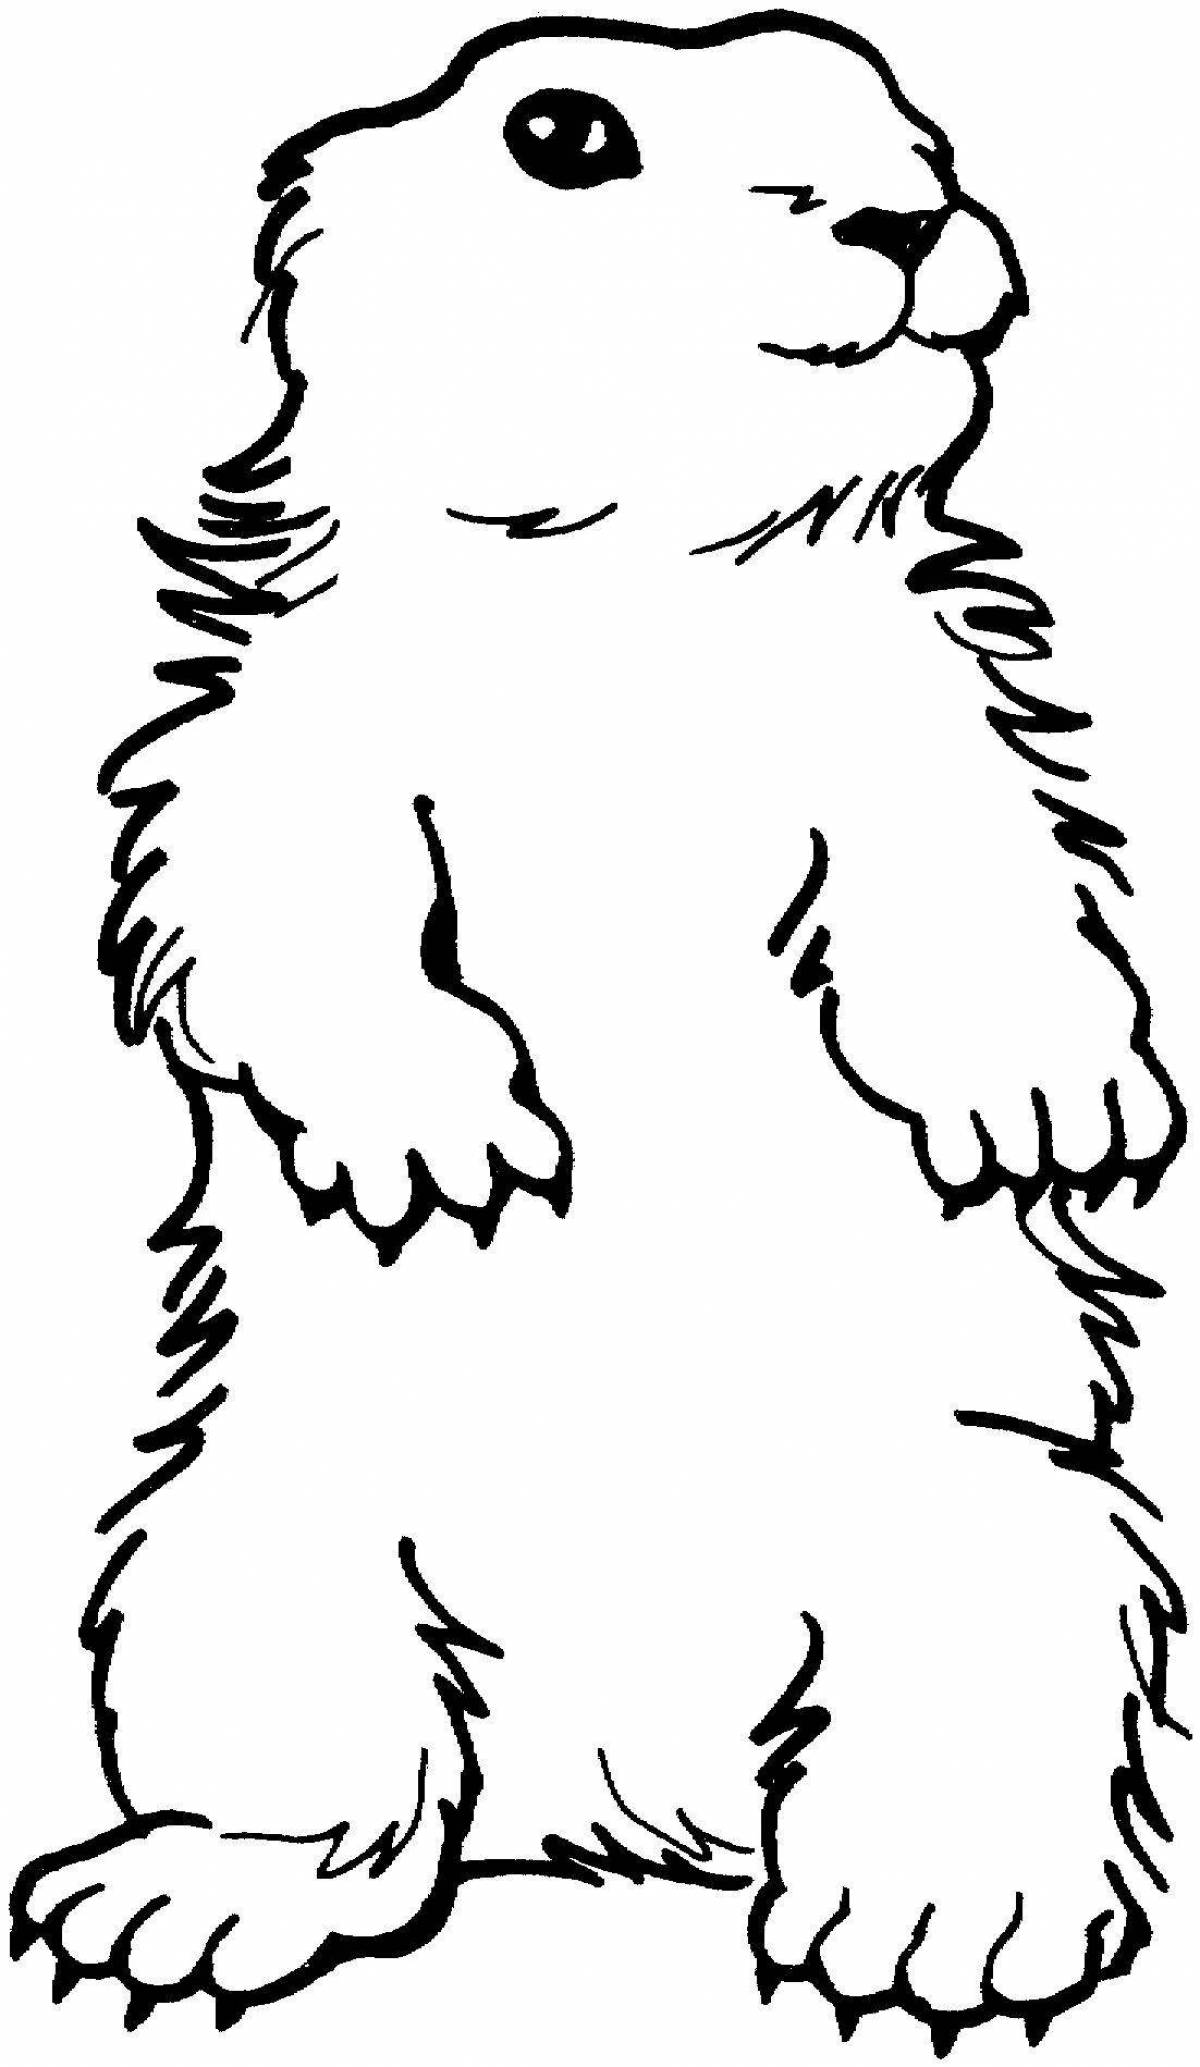 Attractive groundhog coloring page